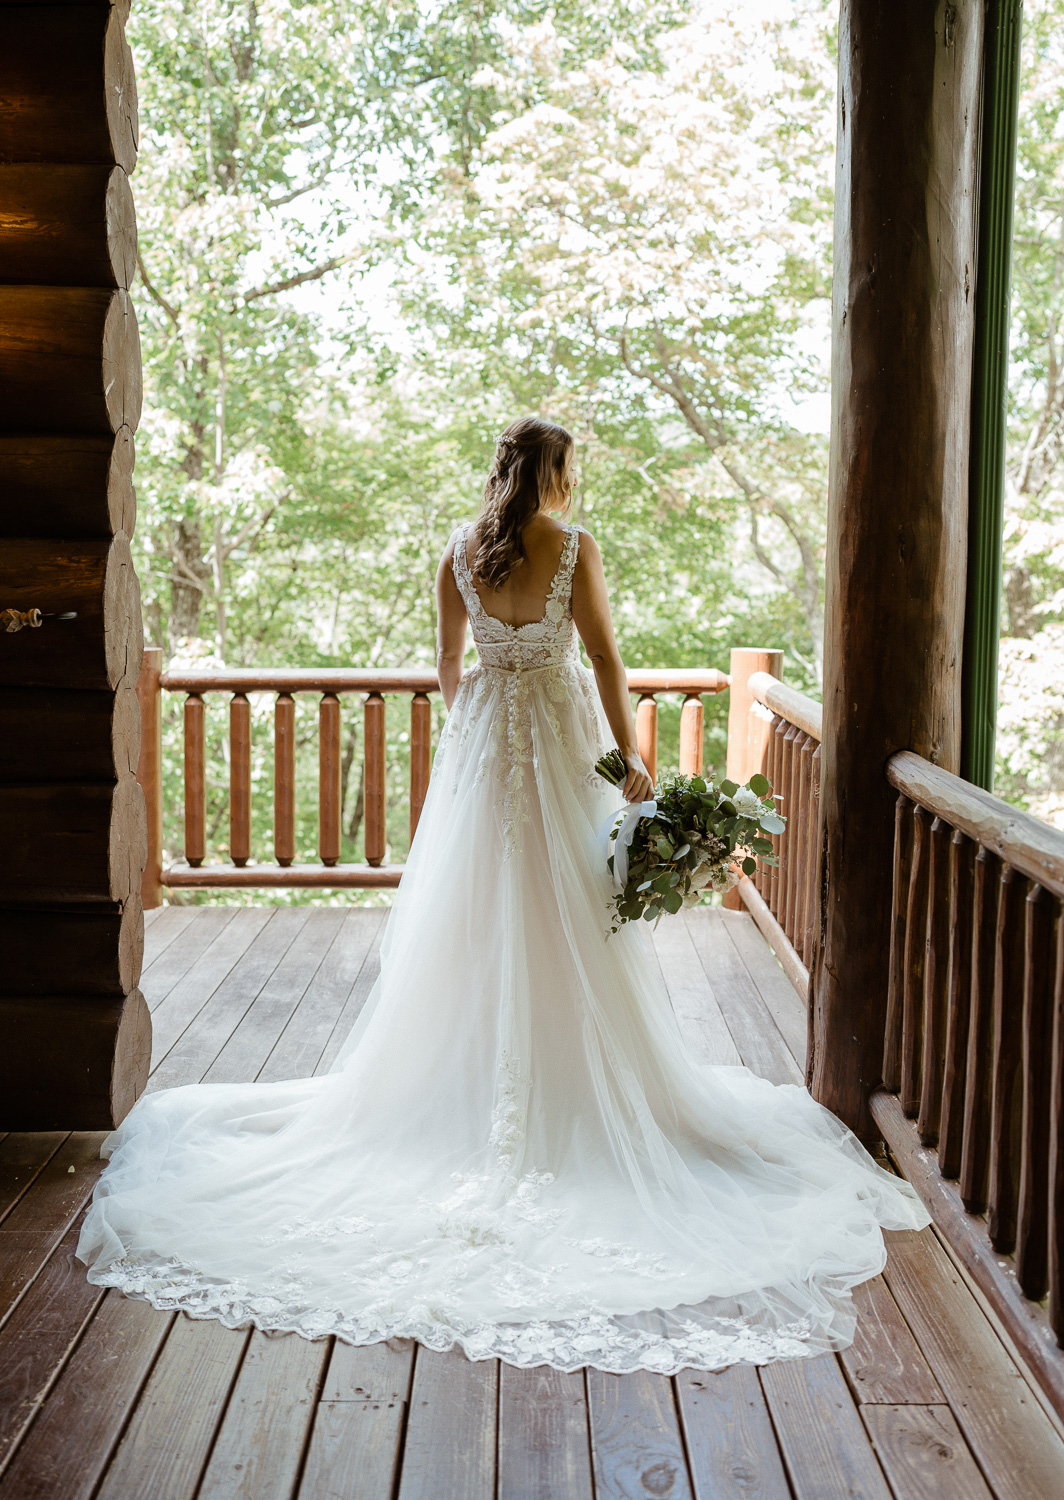 Bride shows off the back of her dress and bouquet